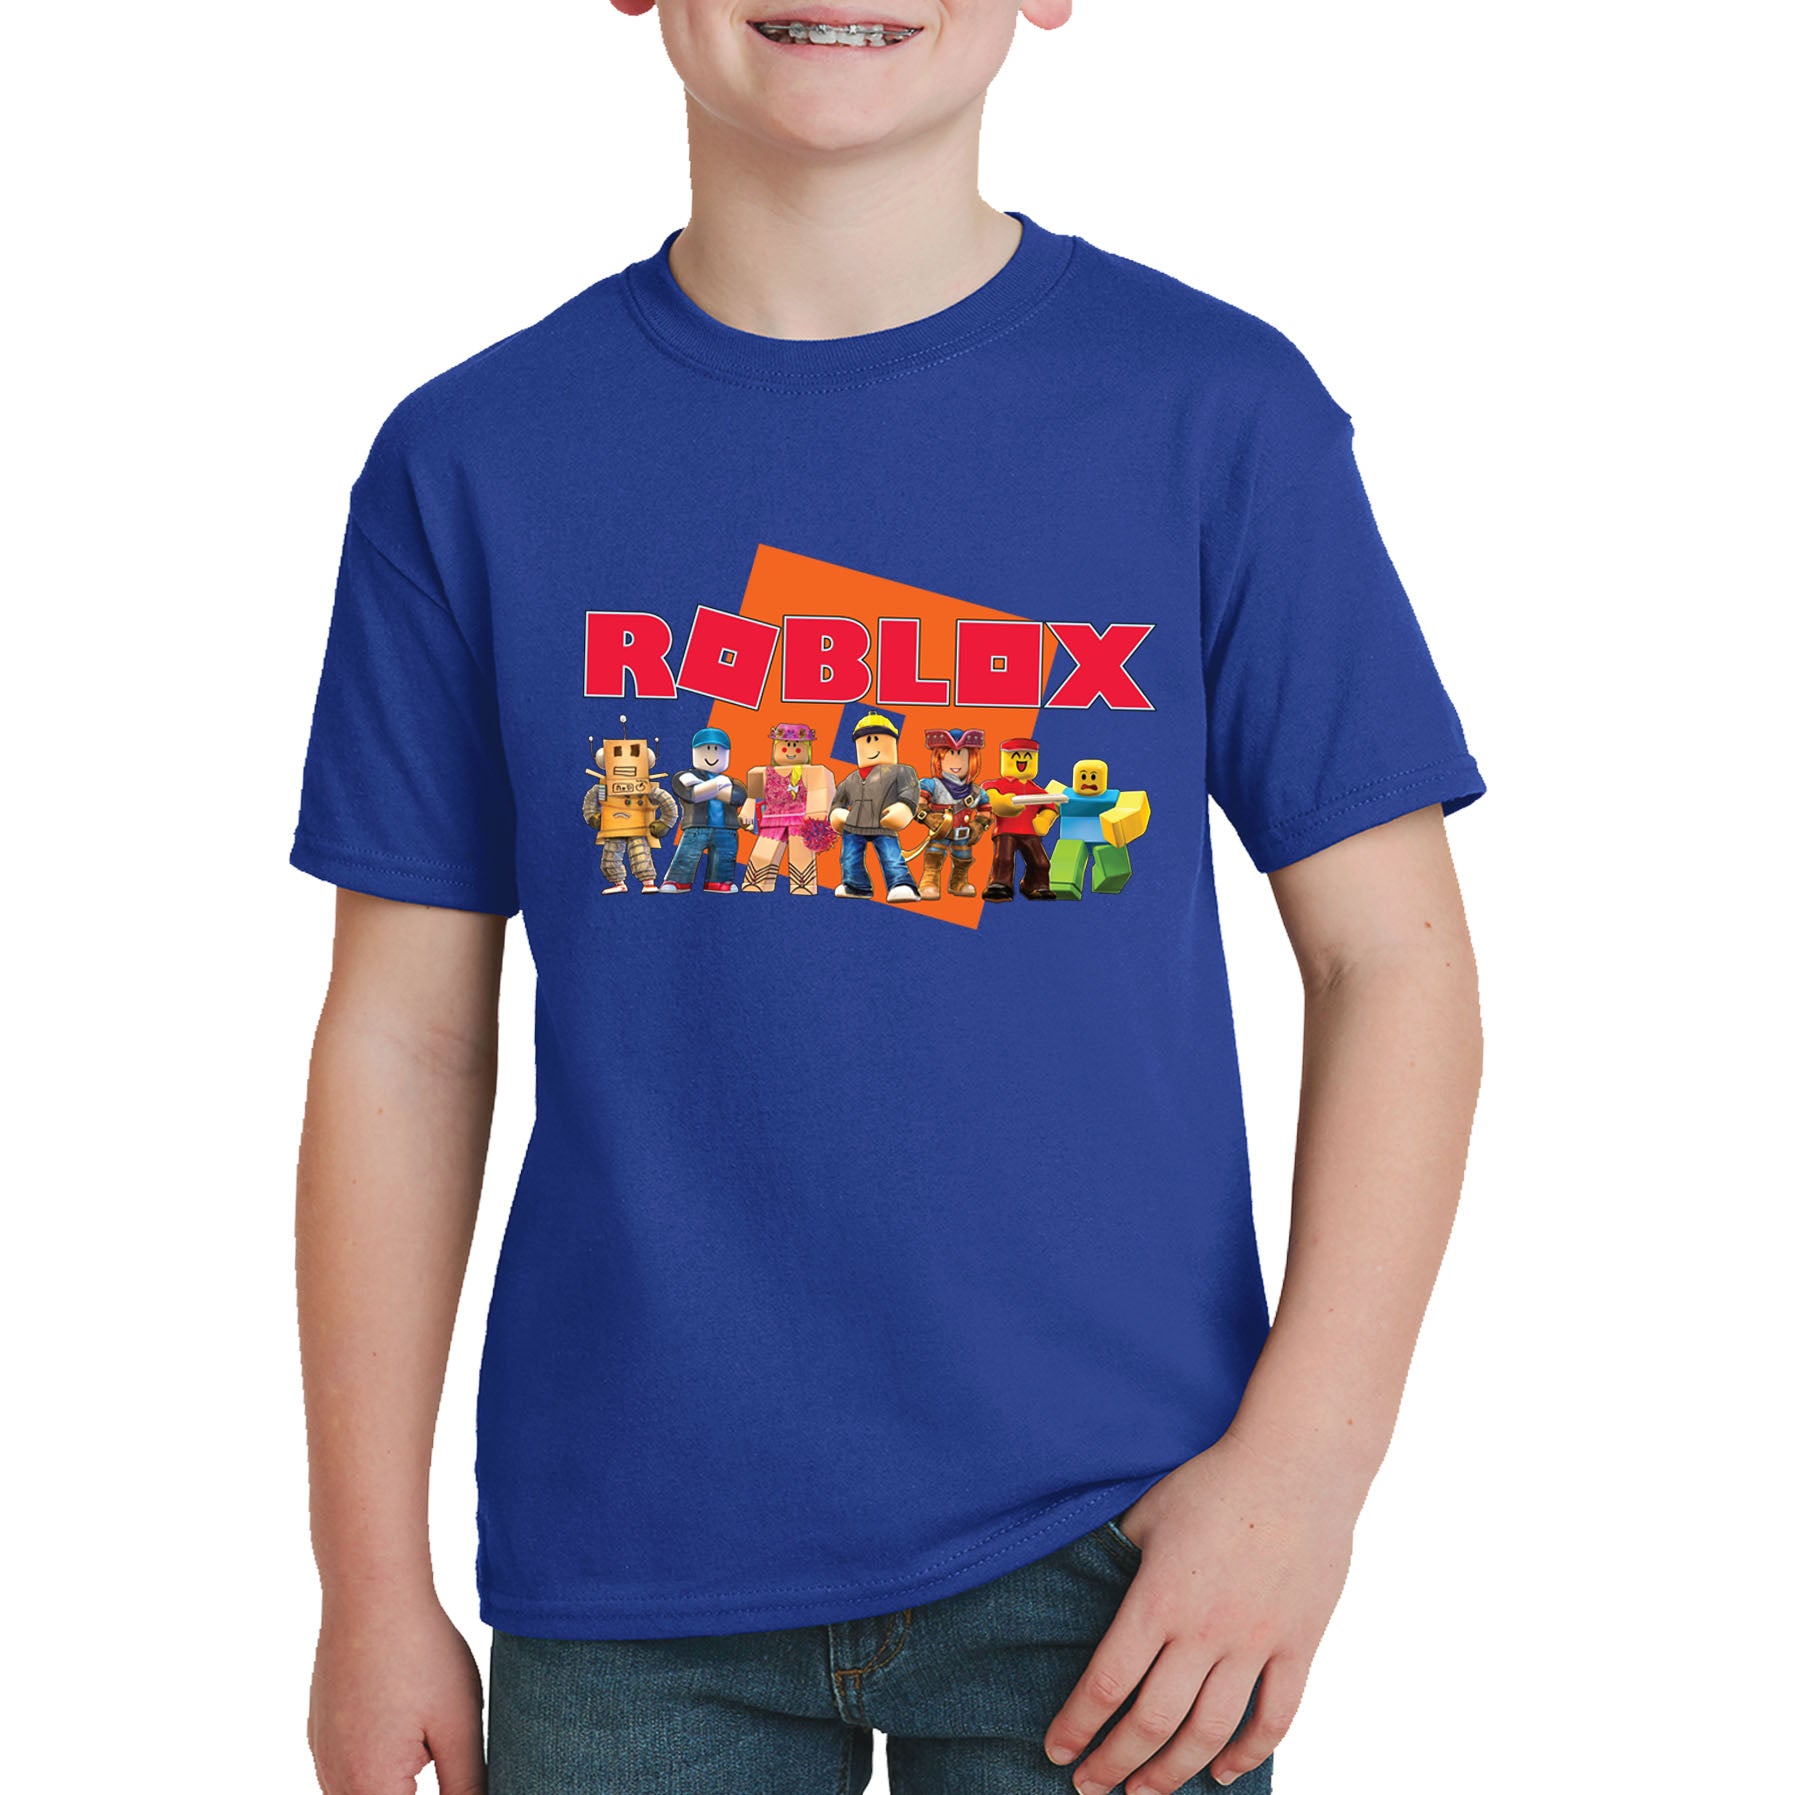 Clothing Codes Roblox Japan Roblox Promo Codes September 2018 - blue girl shirt codes for roblox